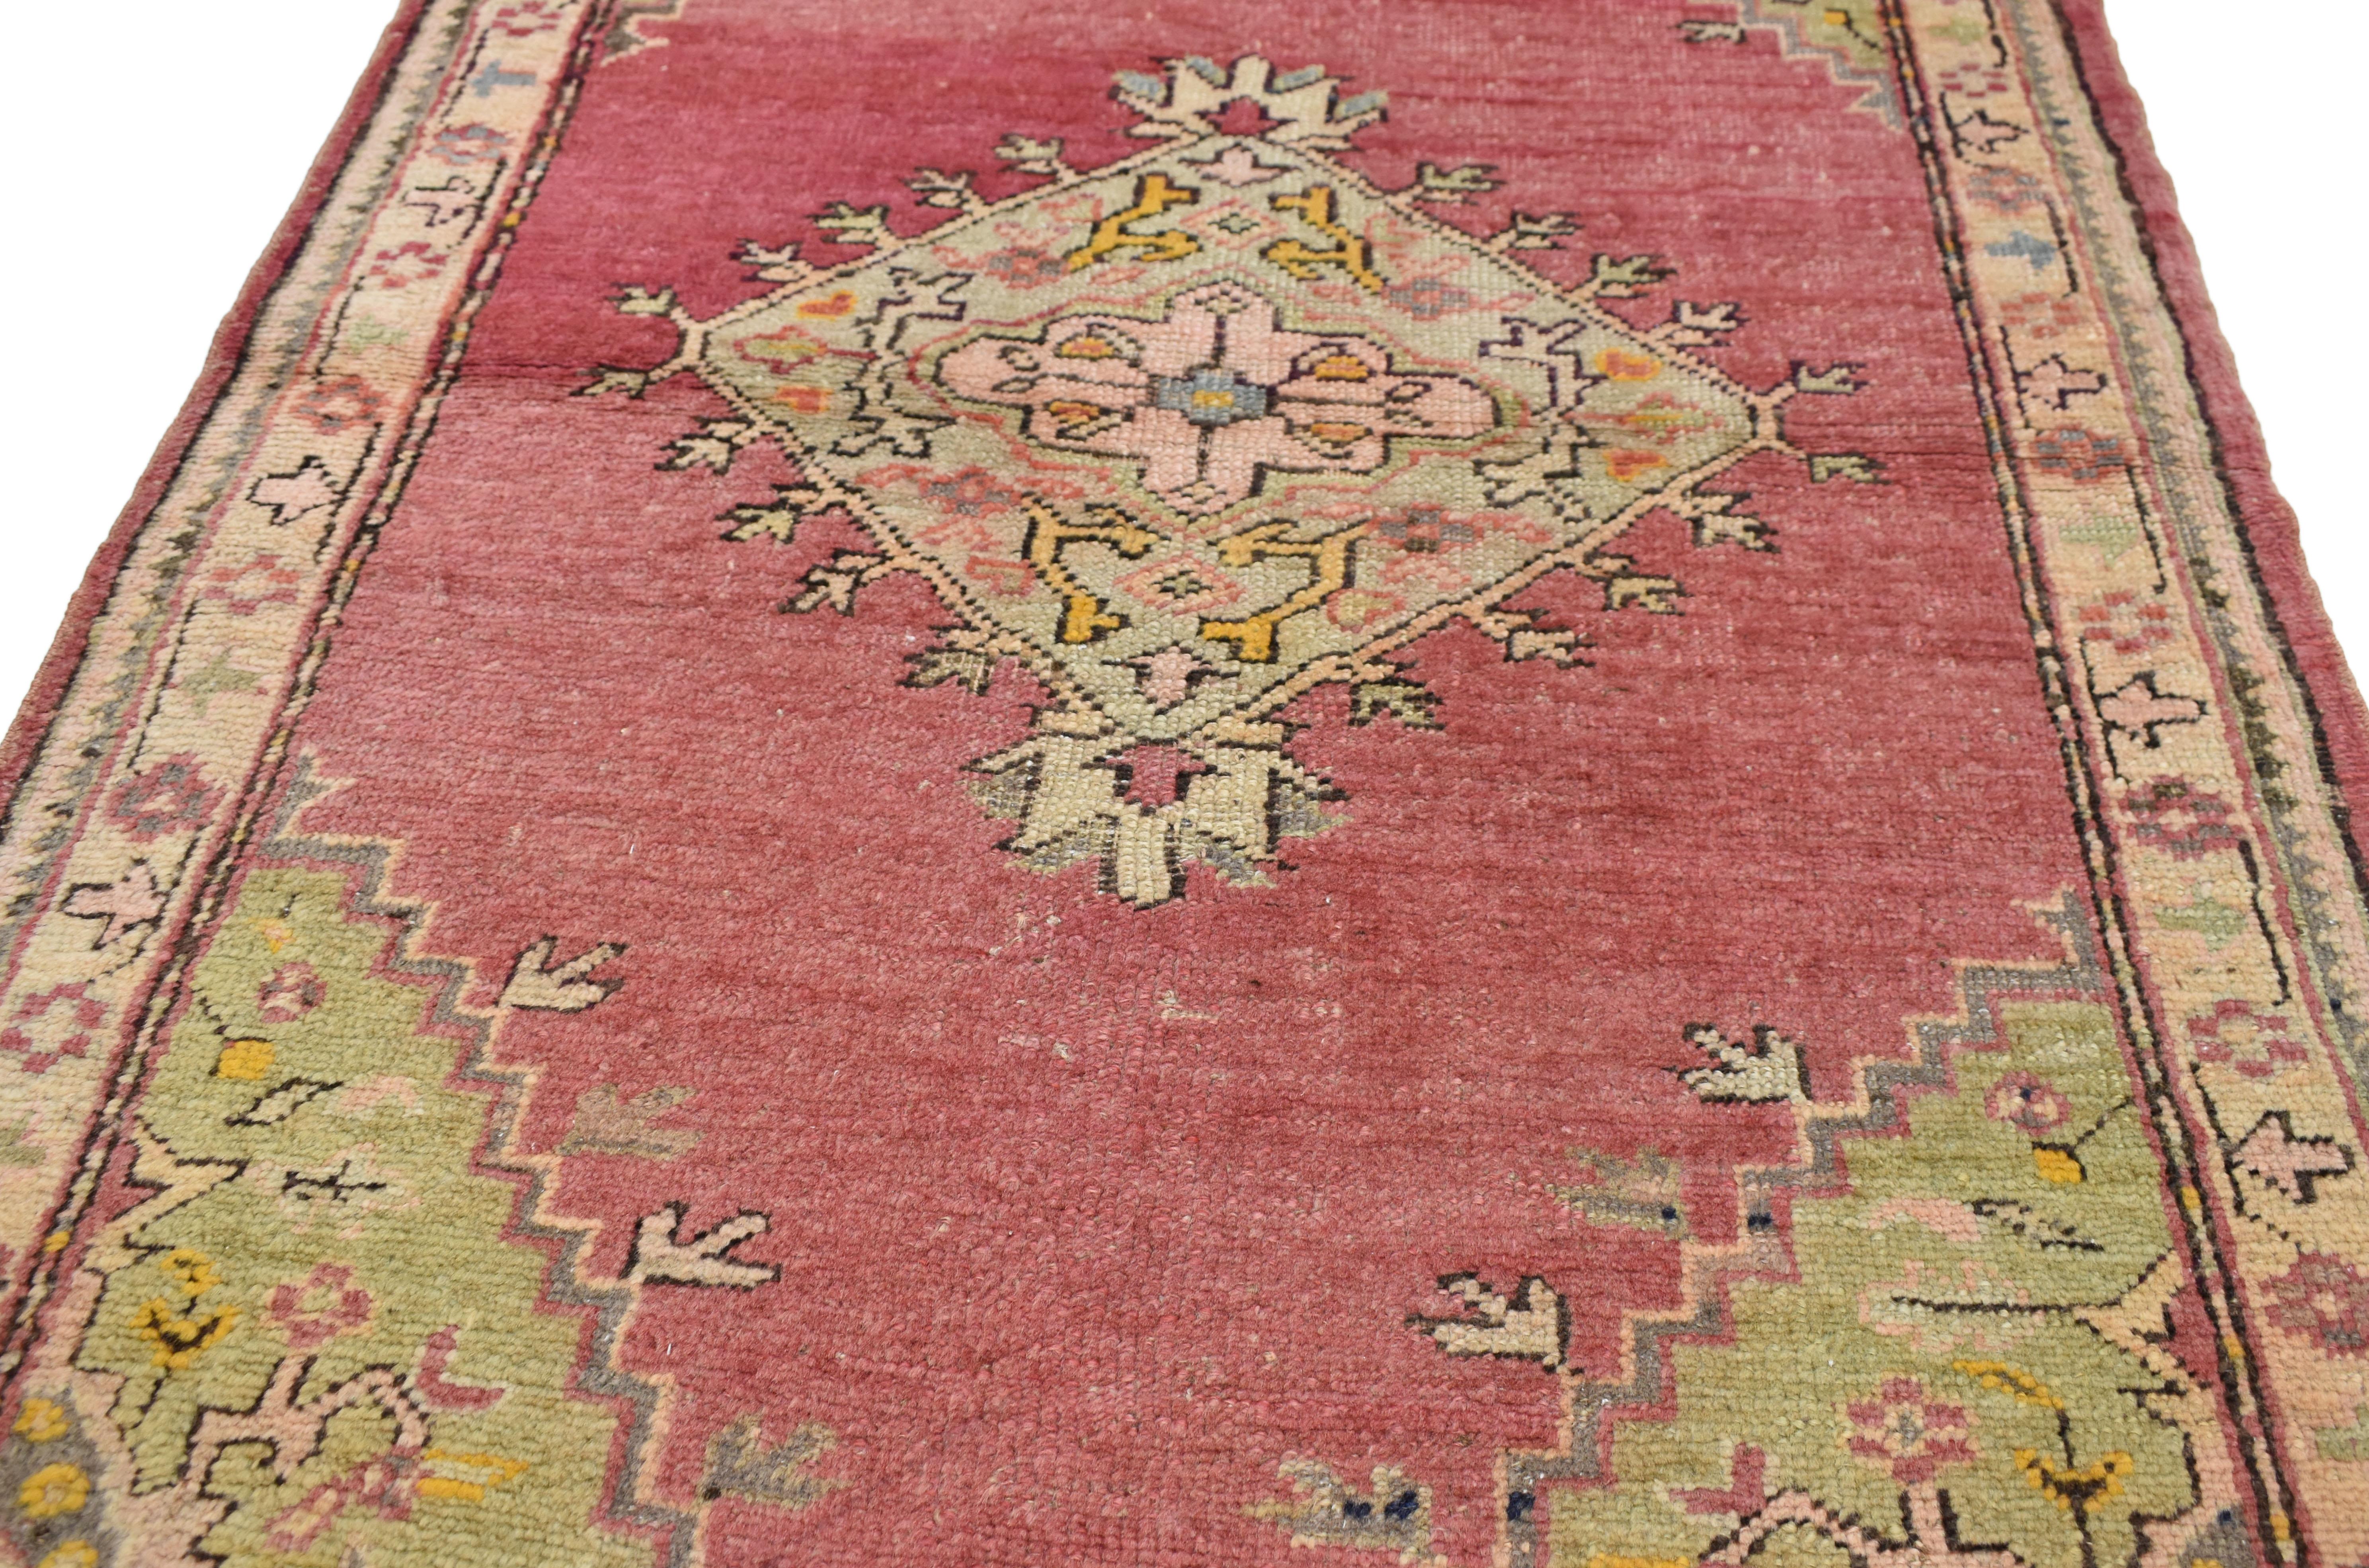 51779 Rustic Style Vintage Turkish Oushak Accent rug, Entry or Foyer Rug 03'06 x 05'07. This hand knotted wool vintage Turkish Oushak rug features a large diamond-shaped medallion with palmette pendants and trefoil hooks across a lovely abrashed